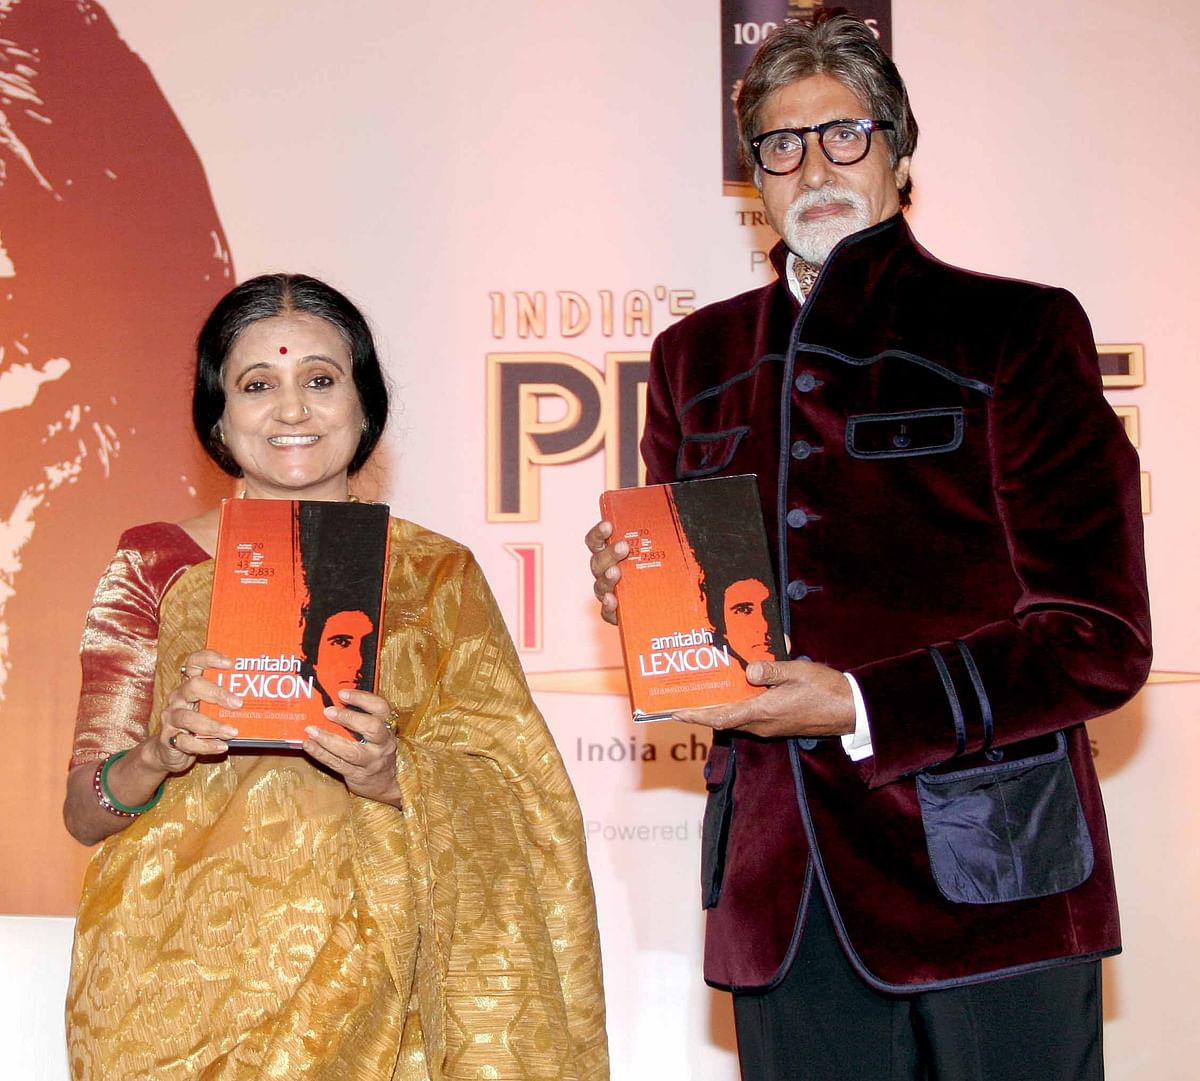 Decode motifs and the nation’s obsession with the magnificent Amitabh Bachchan.